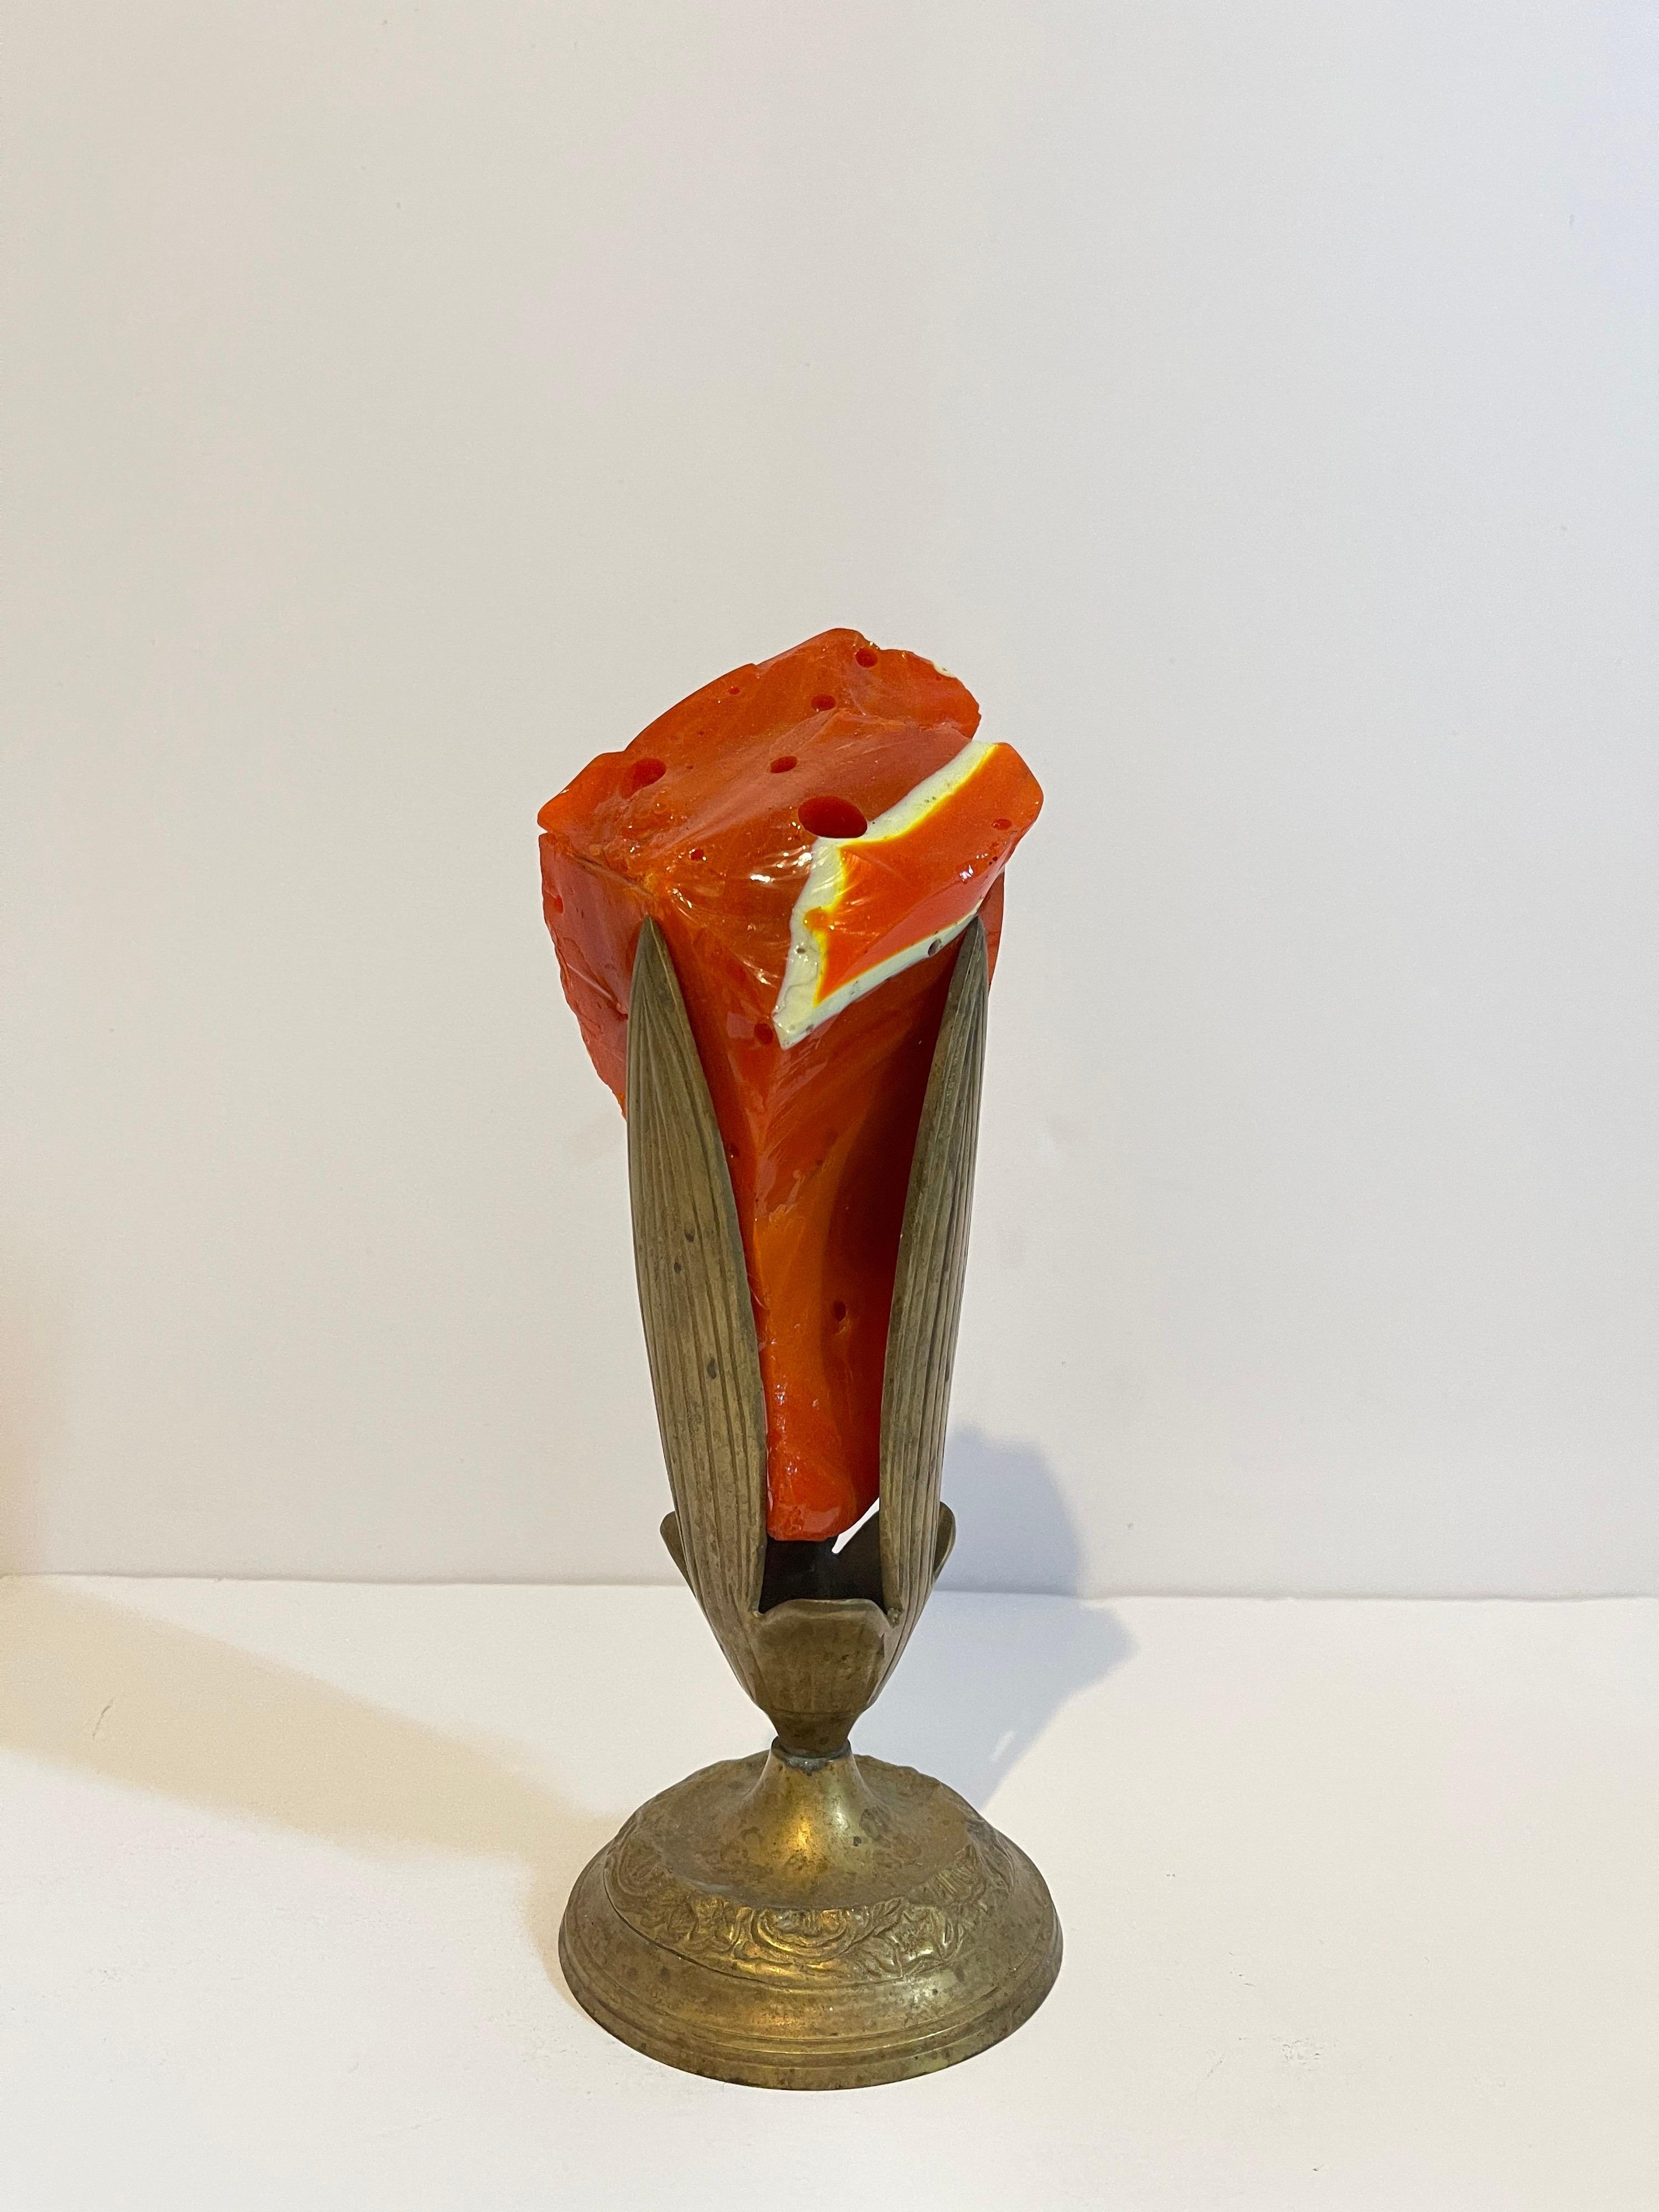 This piece appears unsigned and unmarked. It came from an important estate in the Palm Beach area.
It is an abstract flame or torch in a bronze vase.

Venetian glass (Italian: vetro veneziano) is thought to have been made for over 1,500 years, and